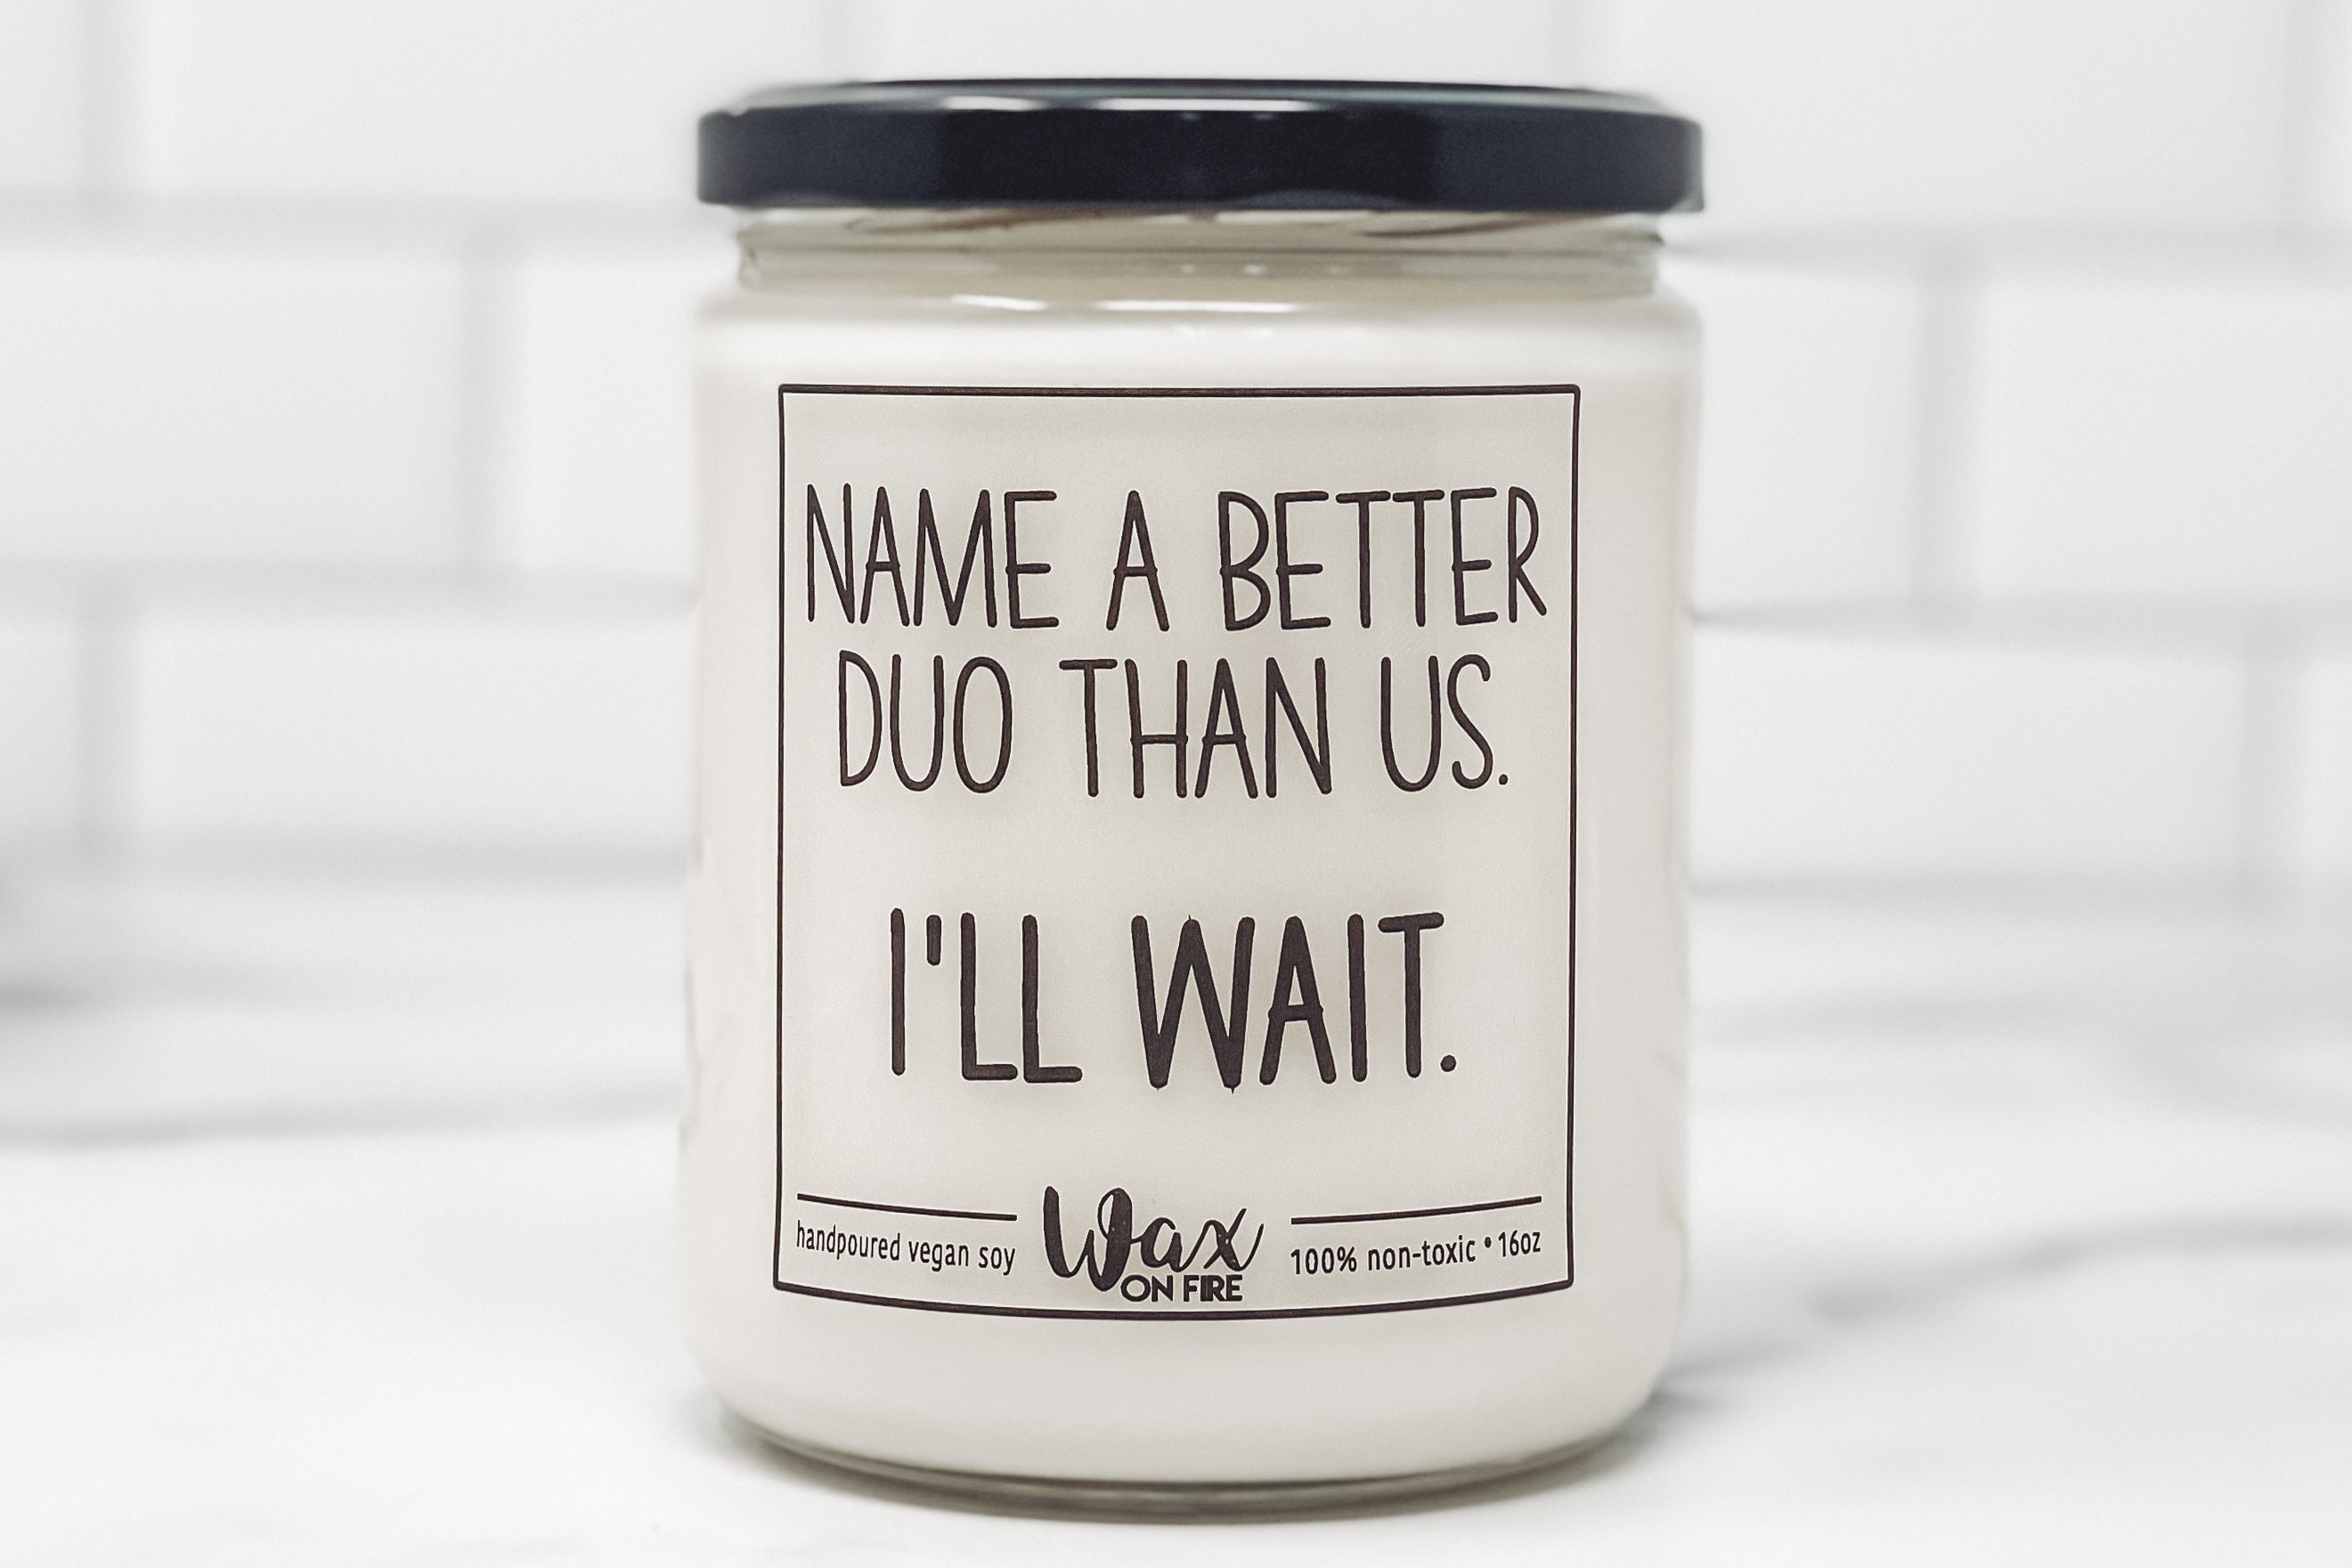 Get A Whiff of This I Funny Candle  Funny Gifts I Funny Candles Label –  Ten and Nickel